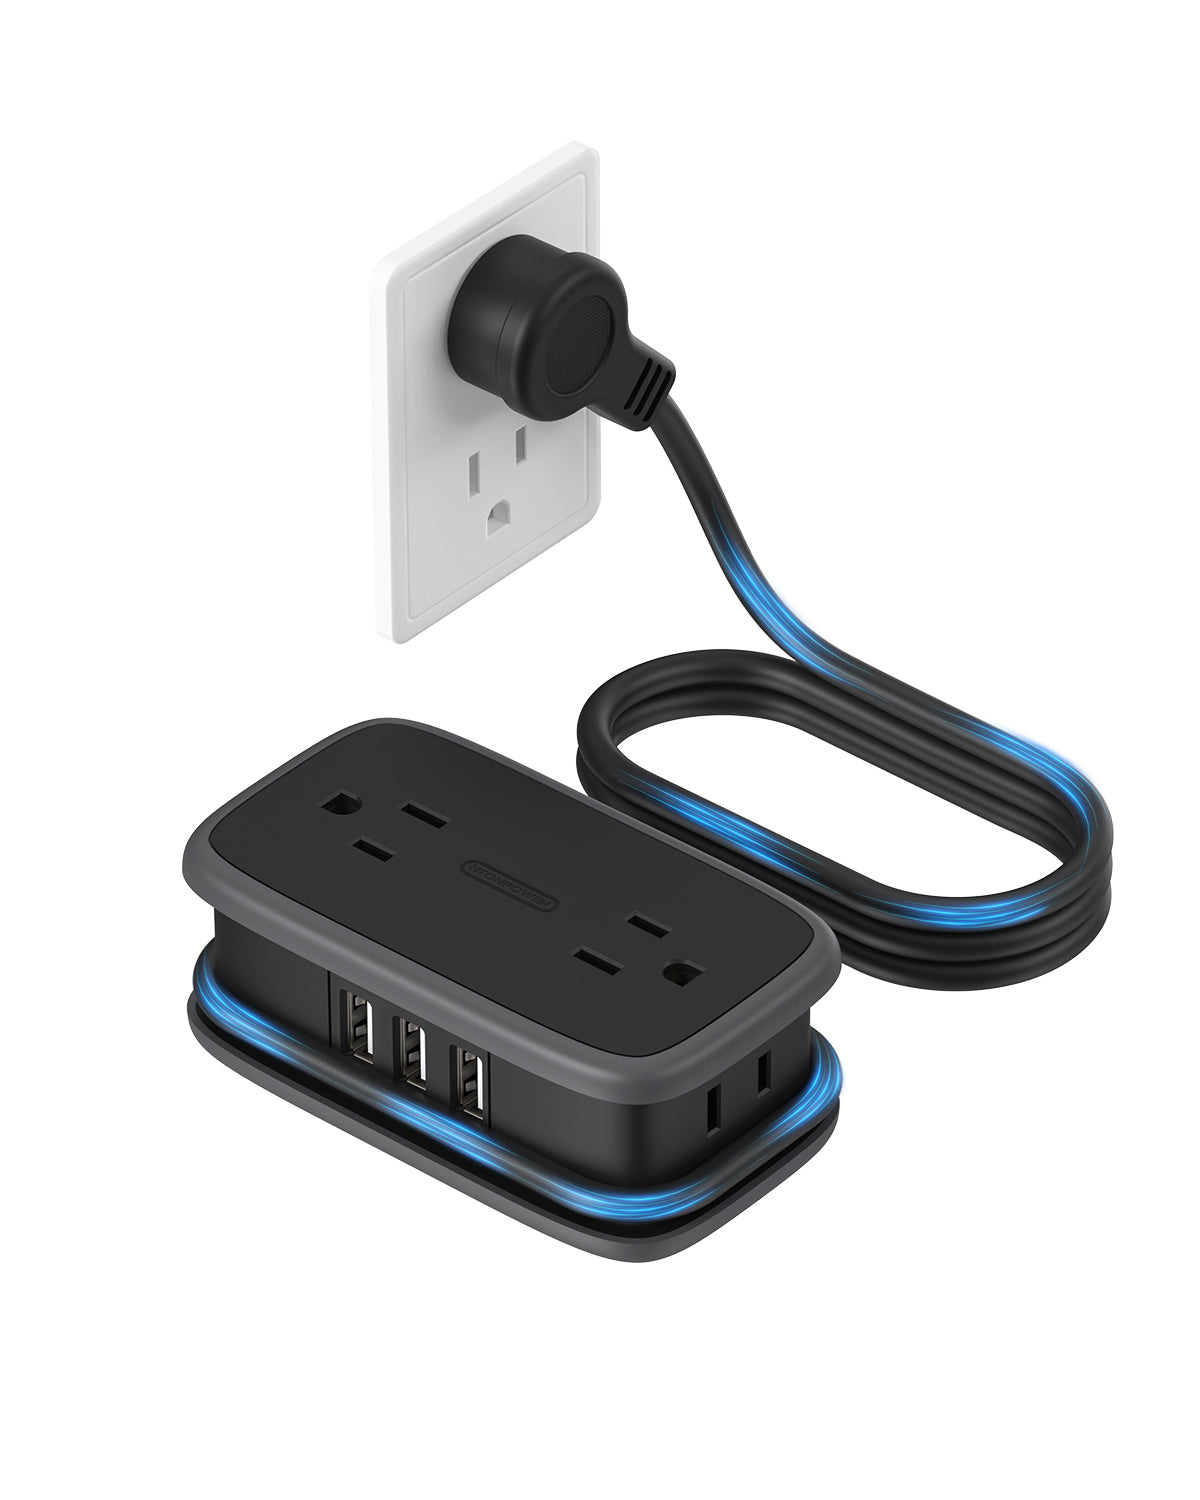 Ntonpower Pocket Power Strip 4 Outlets 3 USB Ports(1 Type C)